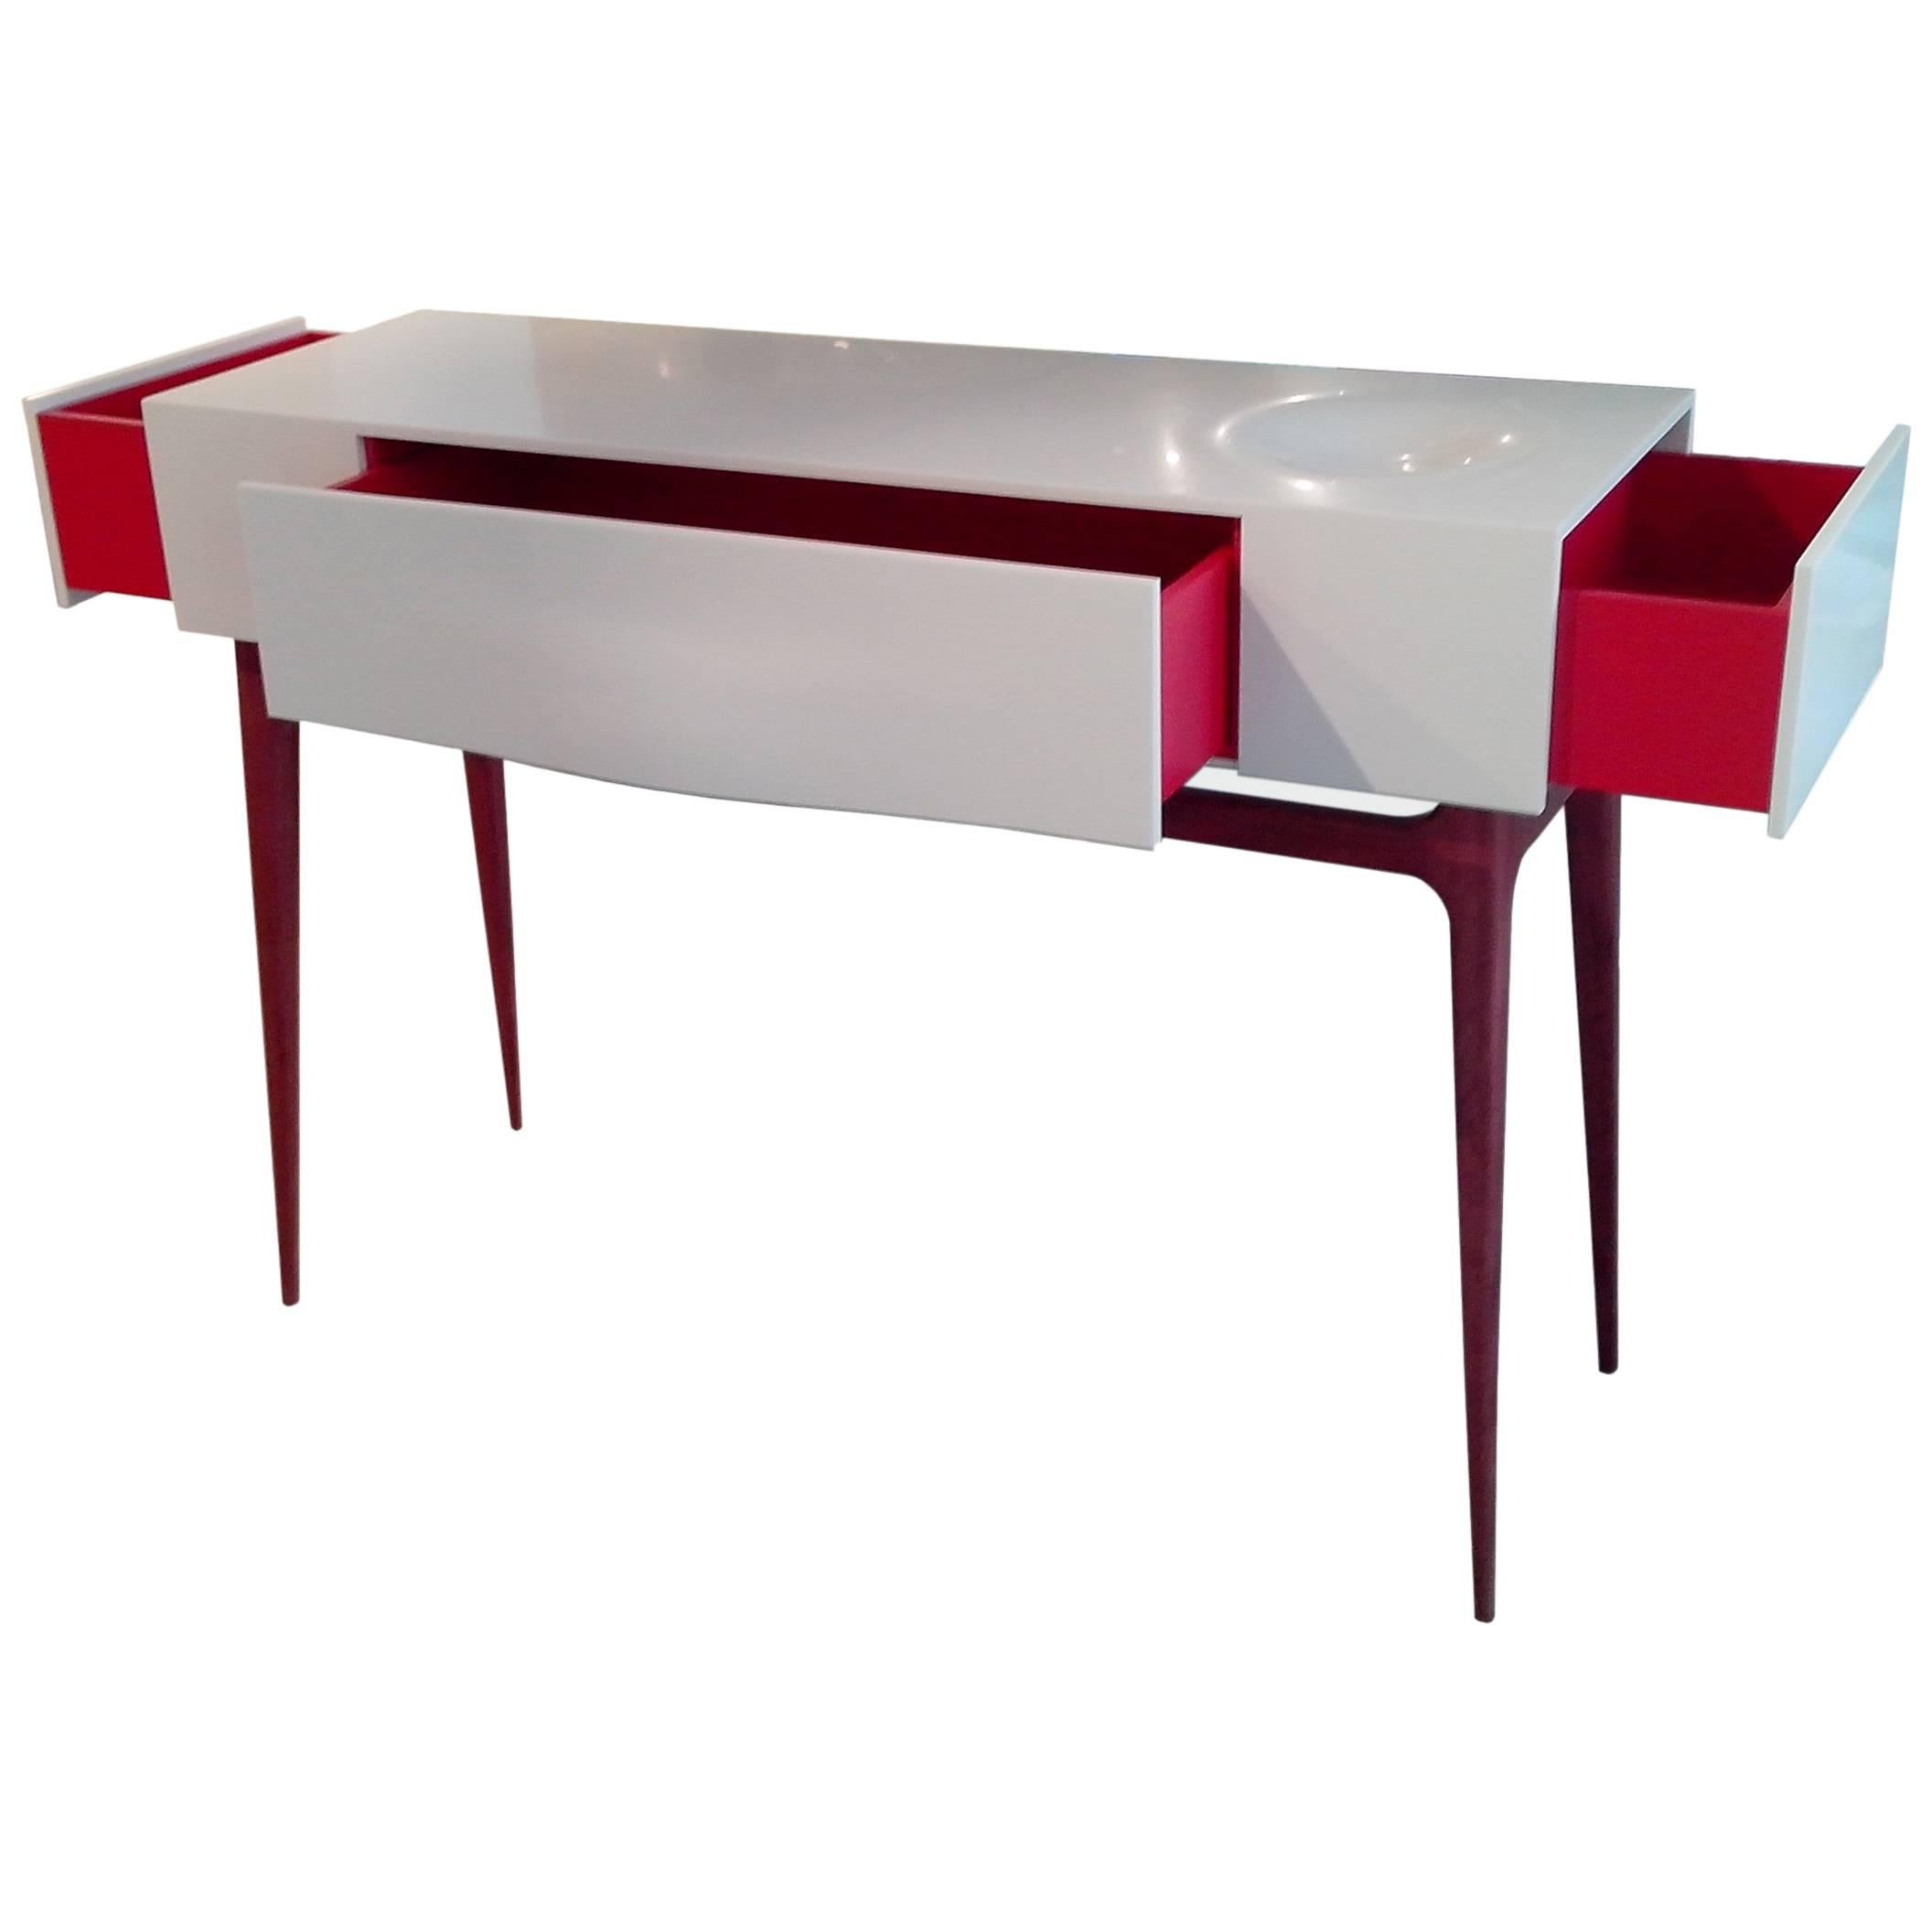 Console by Paul-Bertrand Matthieu in Corian and Amarante For Sale